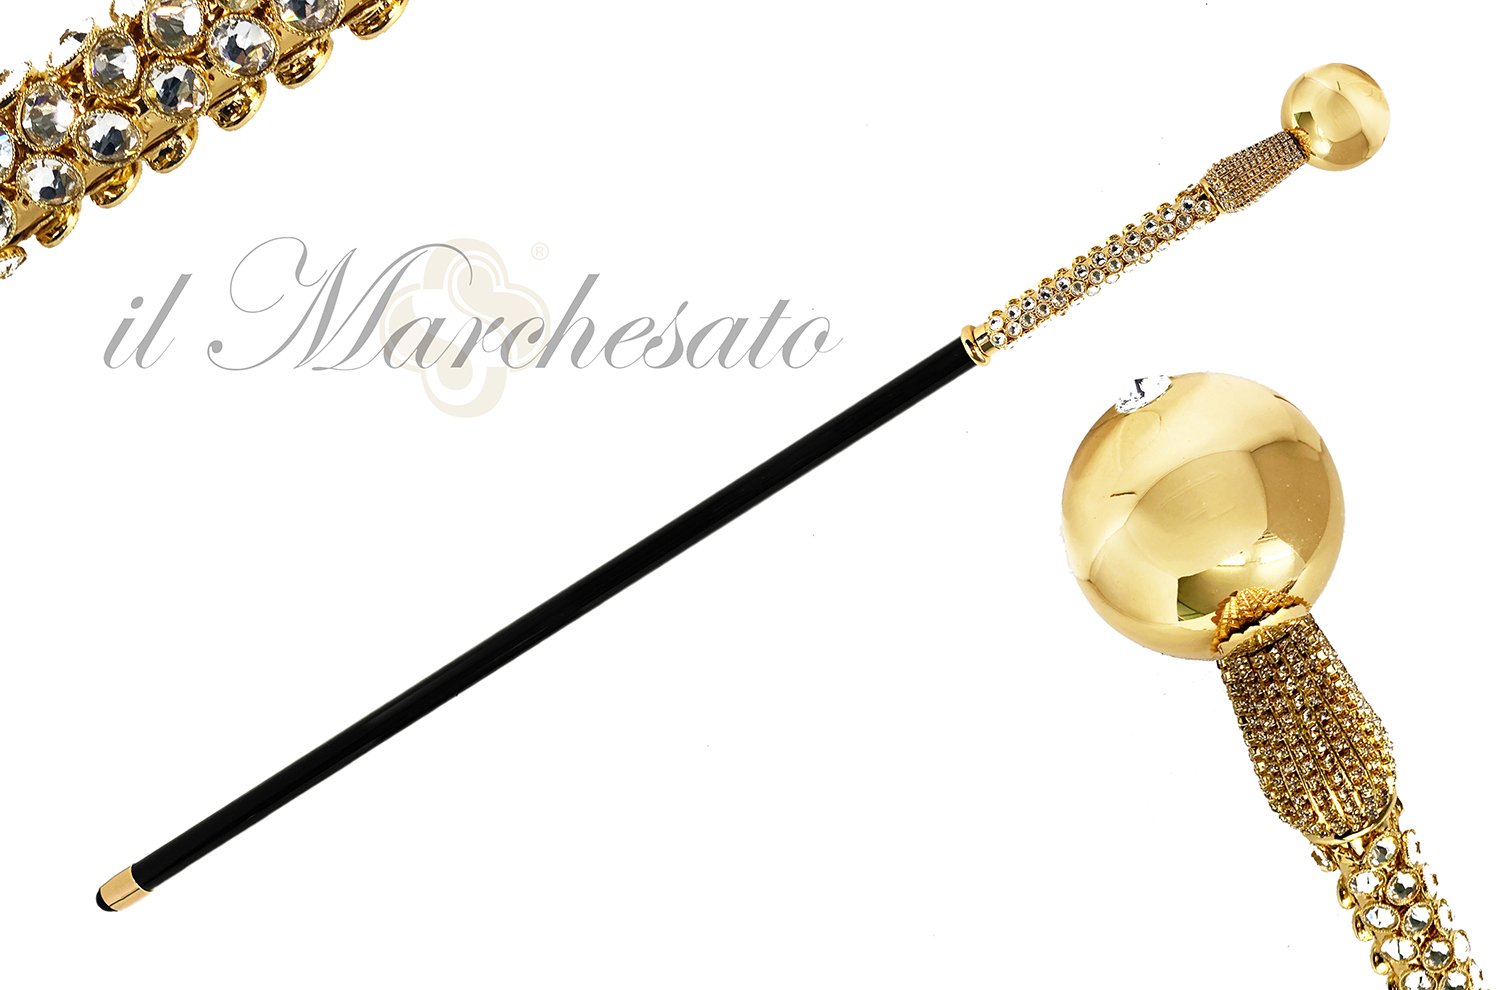 Hand-engraved metal Walking stick - 24K goldplated – ilMarchesato - Luxury  Umbrellas, Canes and Shoehorns